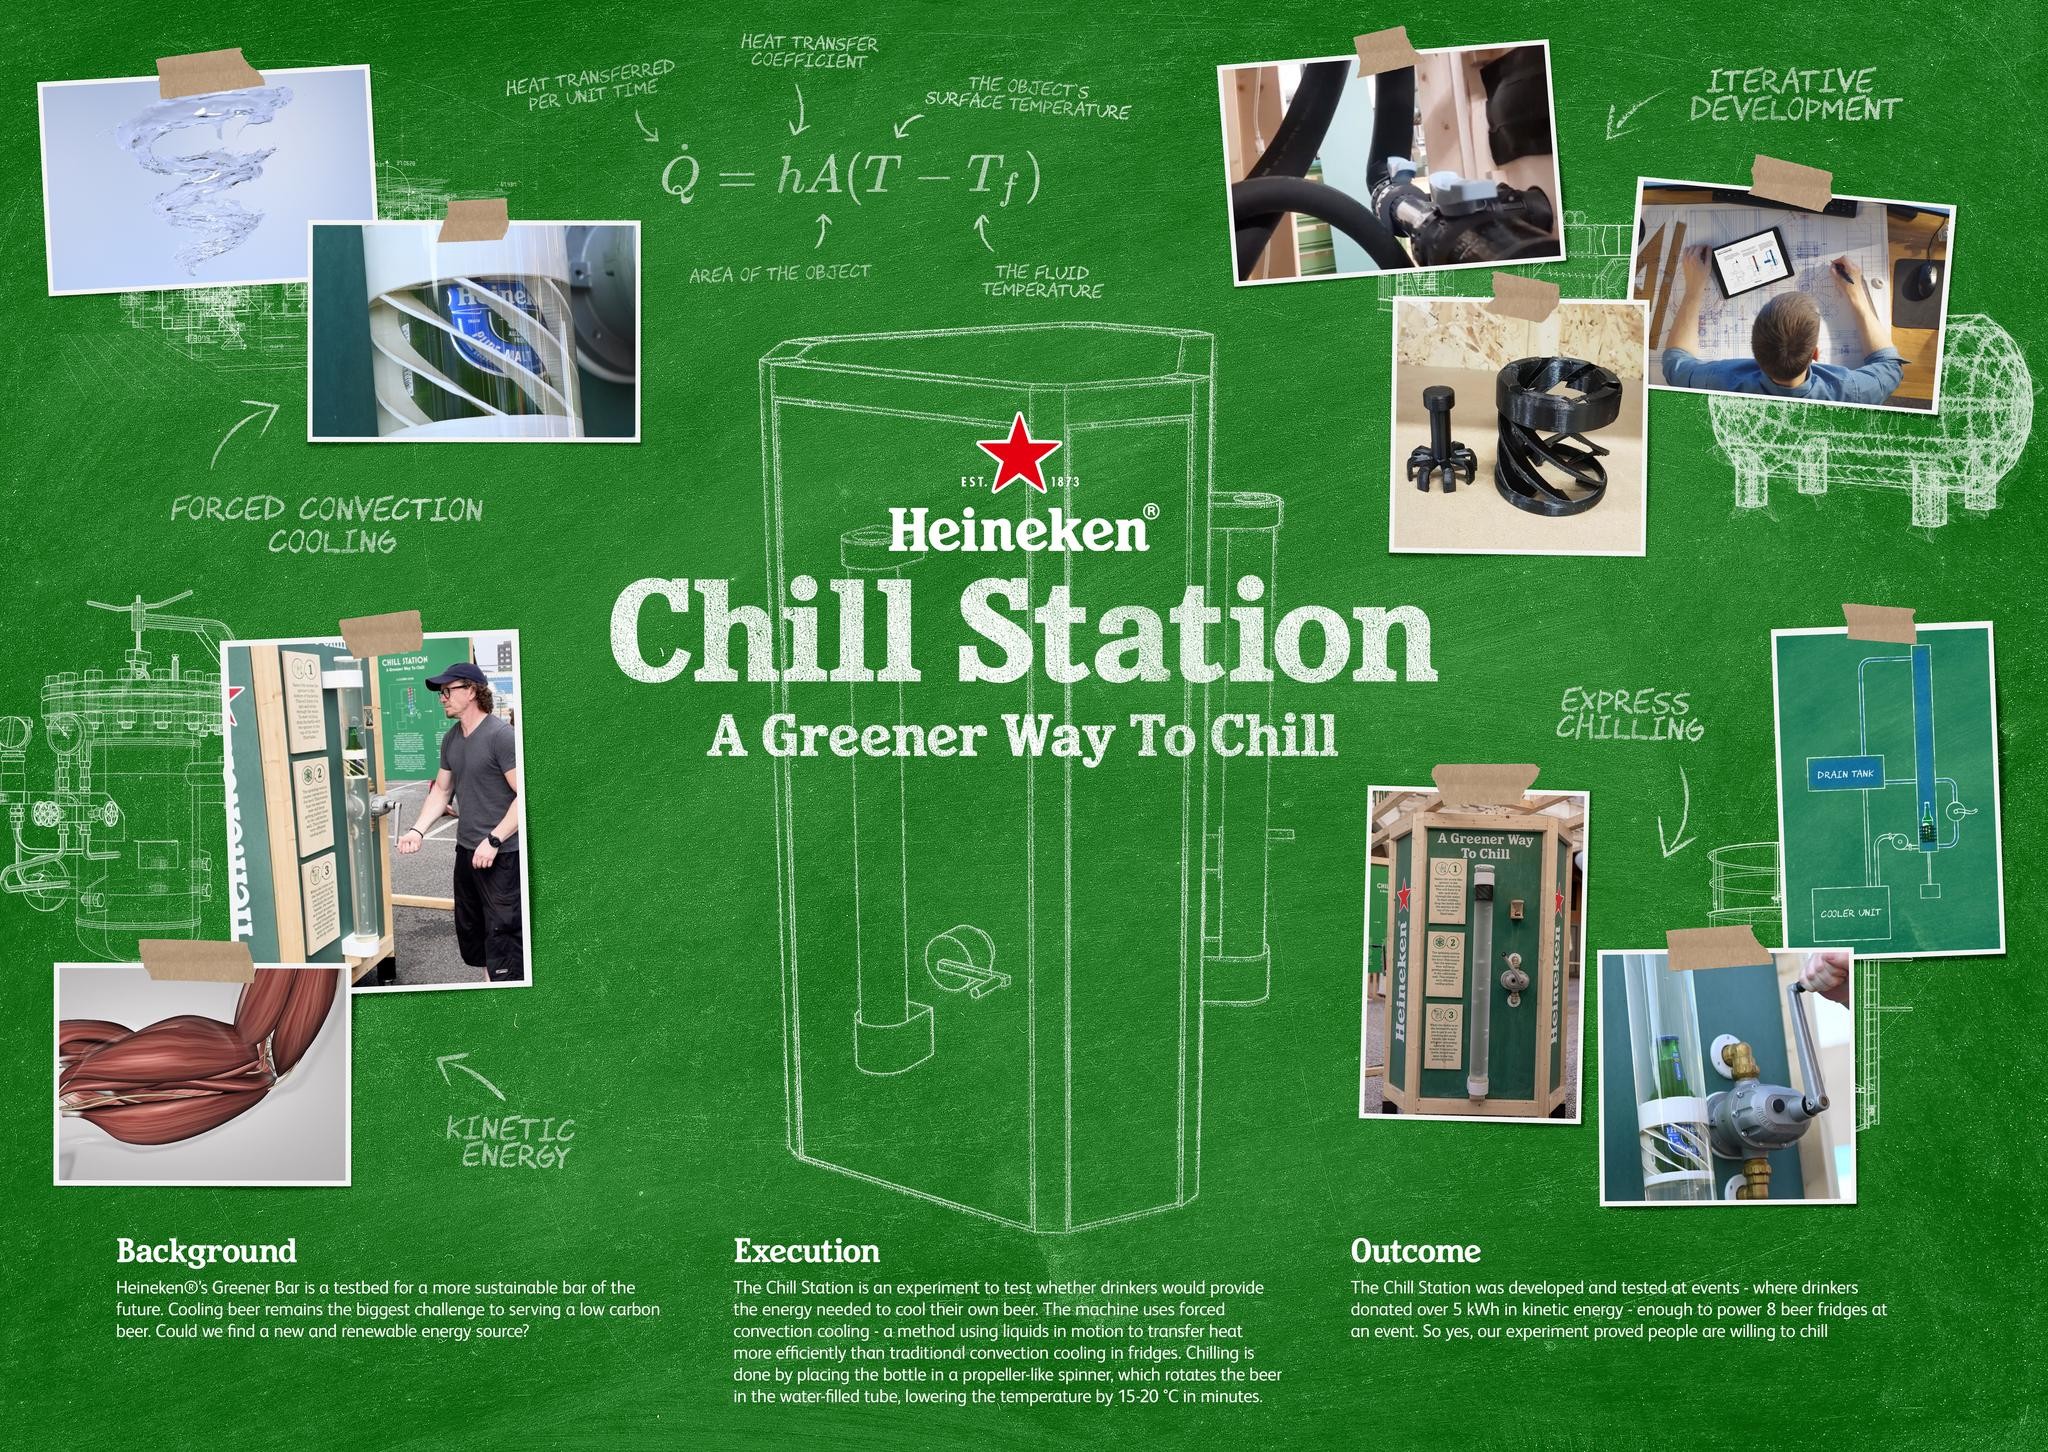 The Chill Station